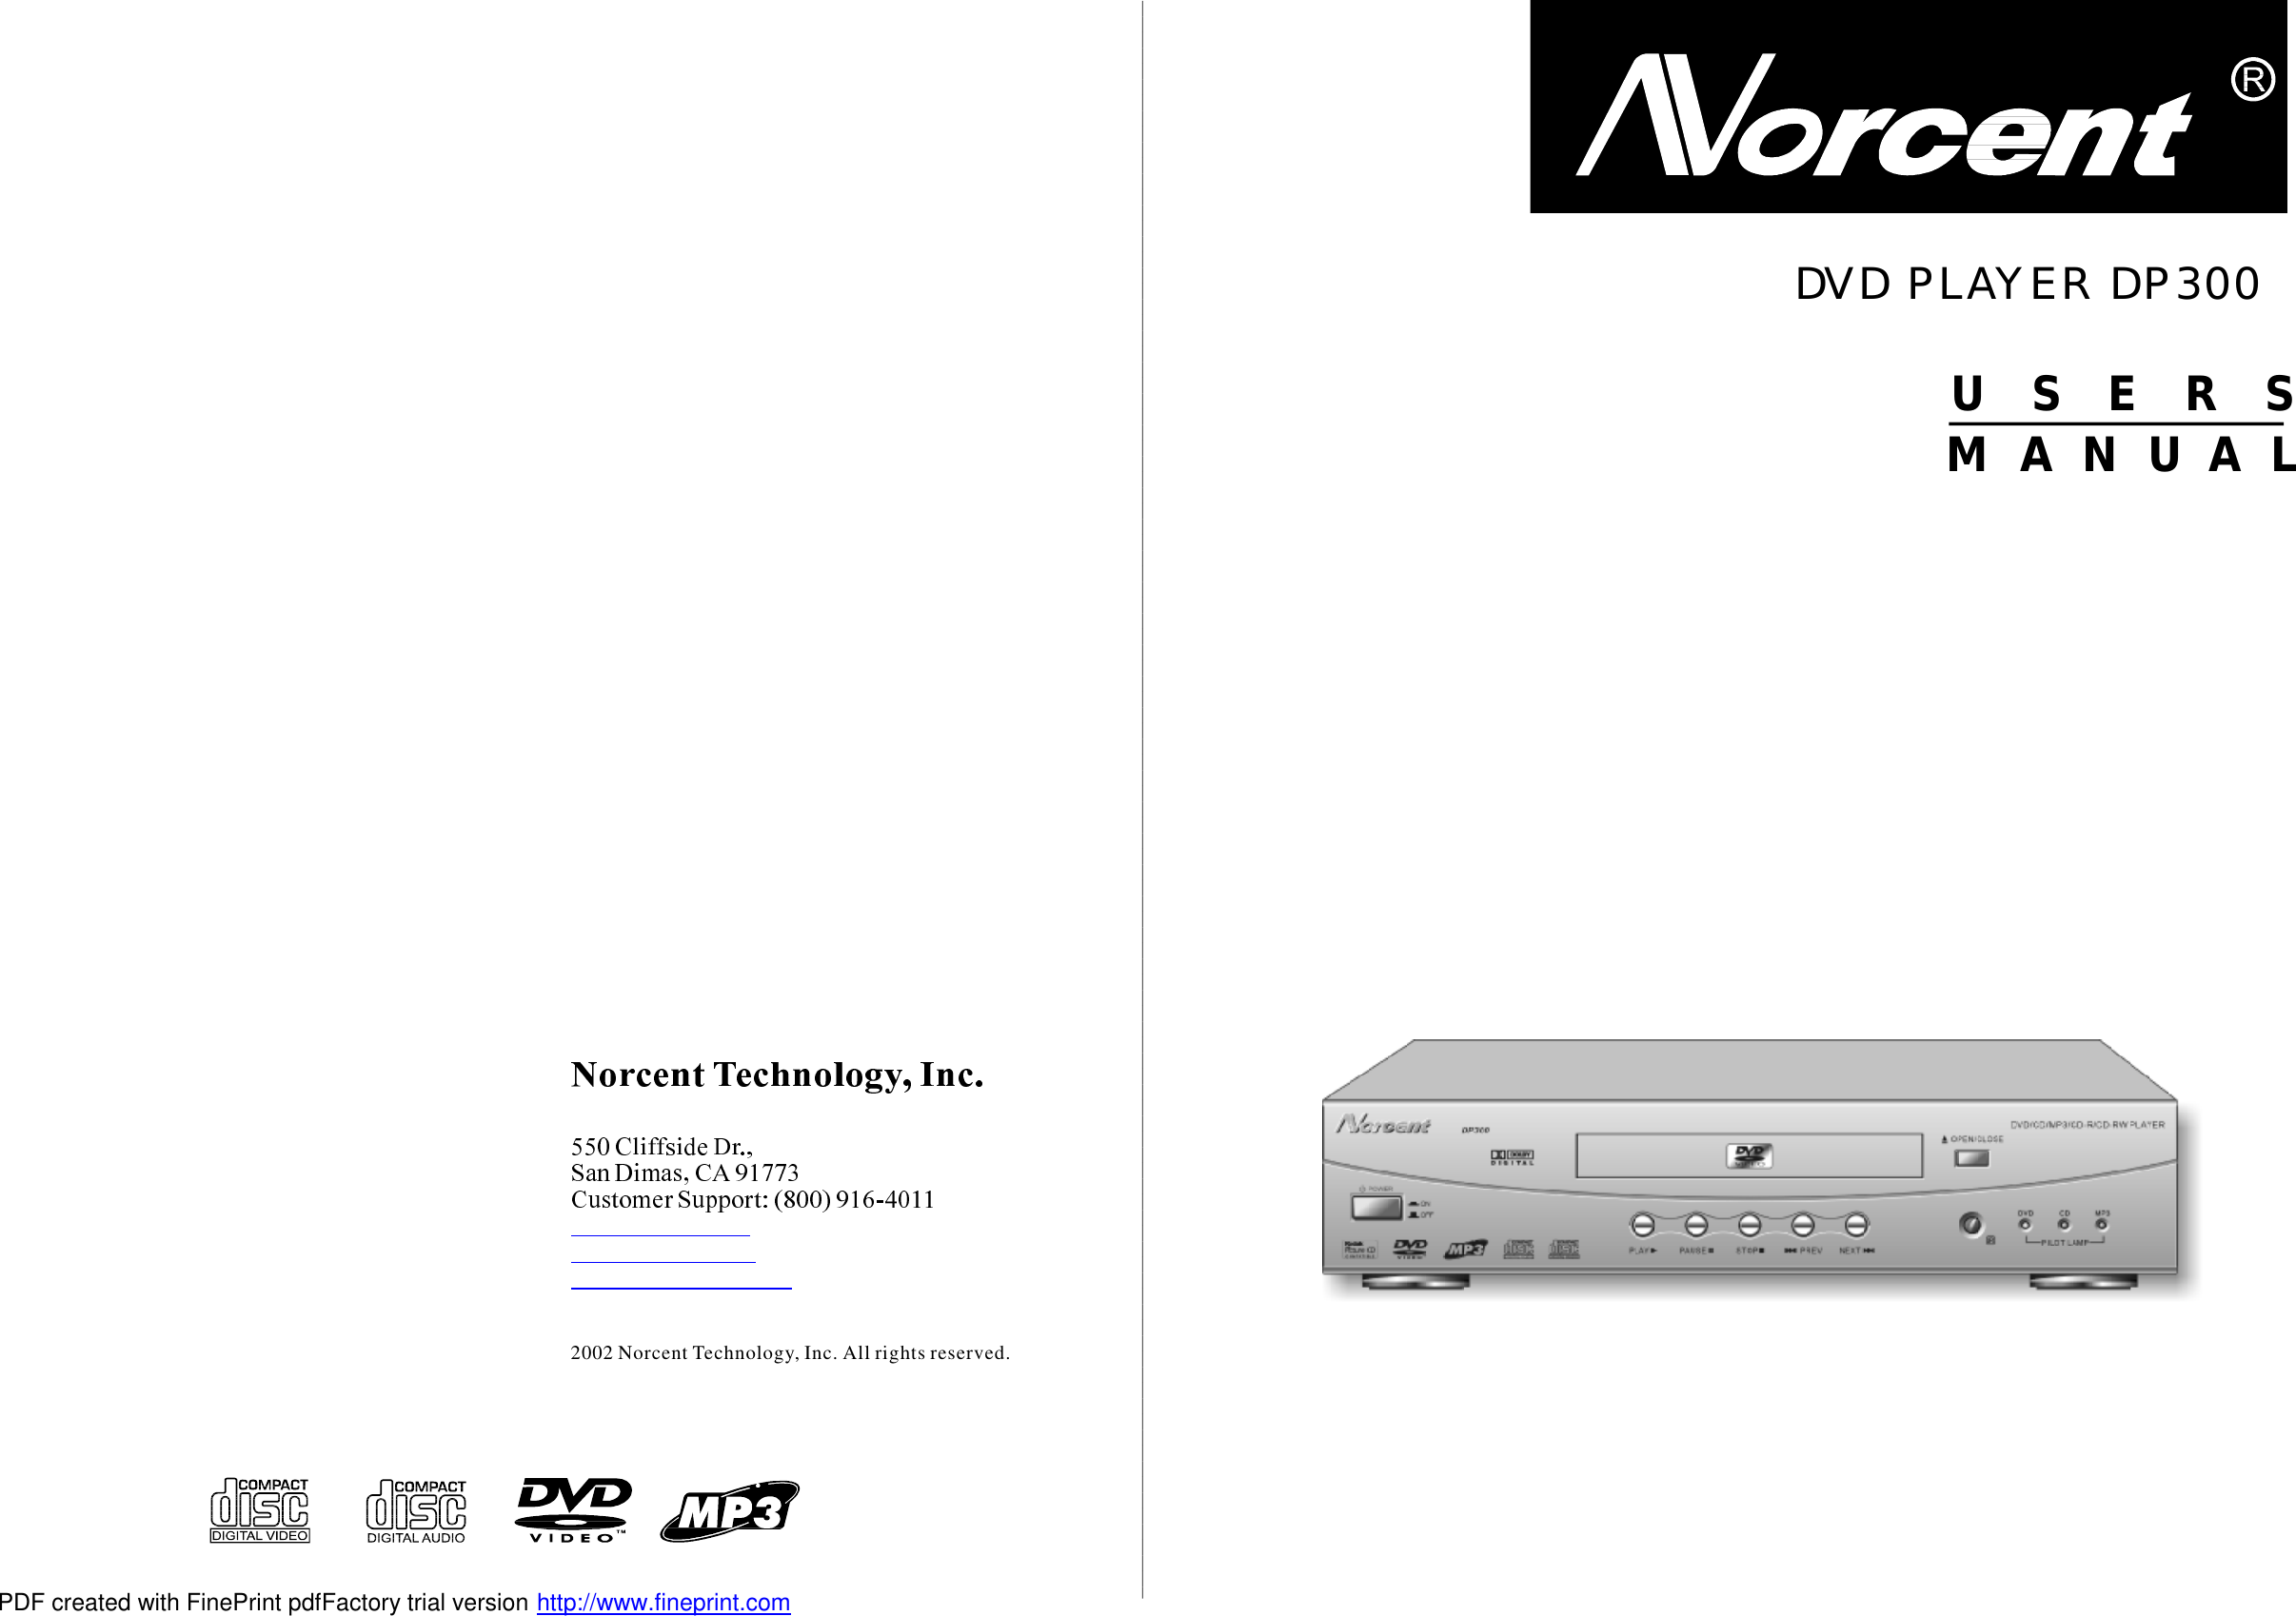 Page 1 of 12 - Norcent-Technologies Norcent-Technologies-Norcent-Dp300-Users-Manual- DP300说明书8.0  Norcent-technologies-norcent-dp300-users-manual